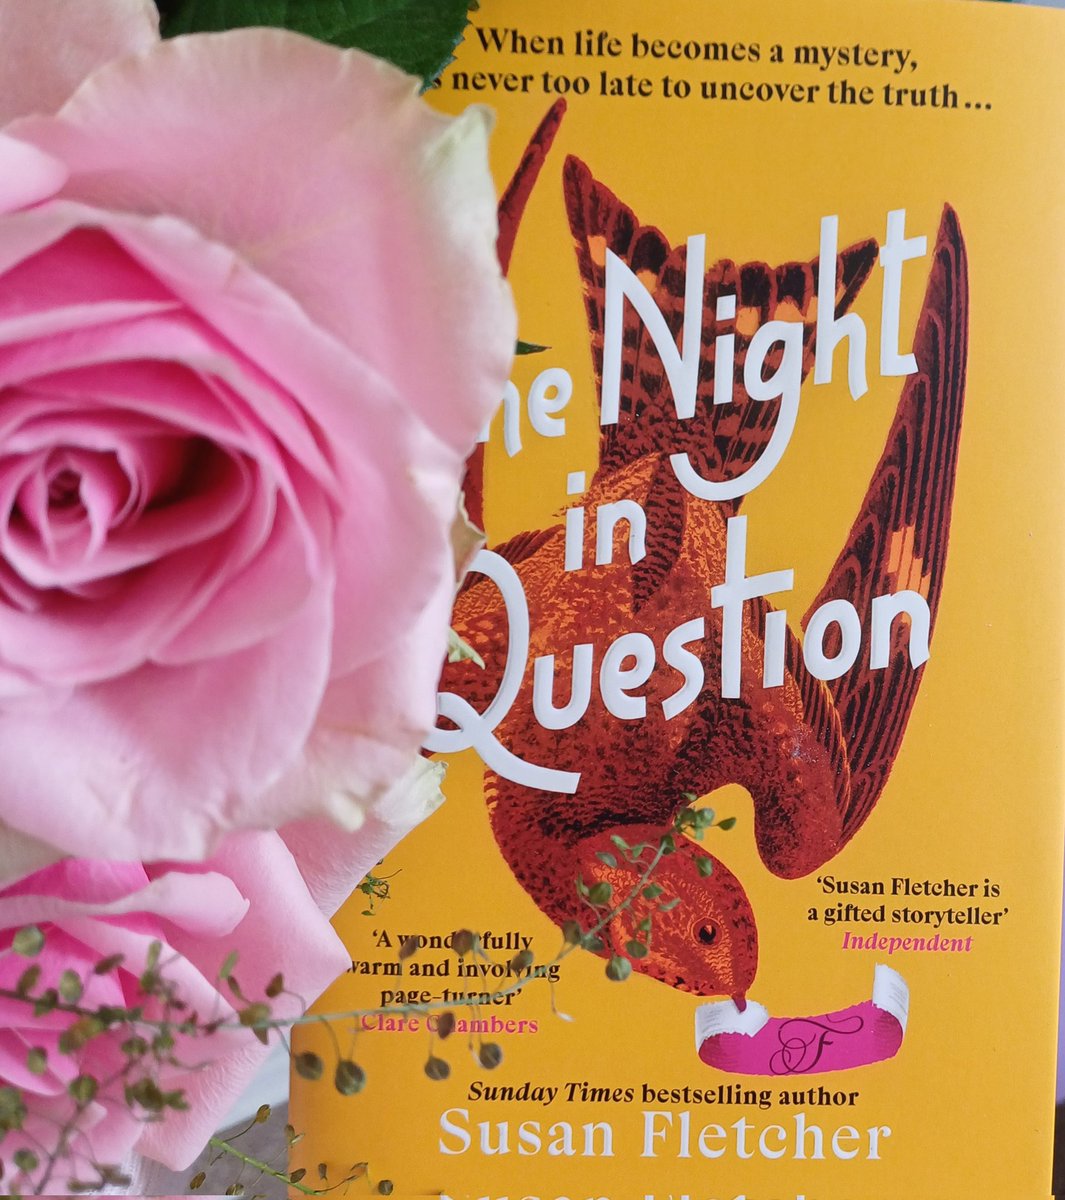 A reminder that if you pre-order #TheNightInQuestion with the wonderful @warwick_books (🌟), you'll be entered into a draw to win a big bouquet of roses!! 💐 xx All details here: warwickbooks.net/promotions 🩷💛 (Thank you xx)